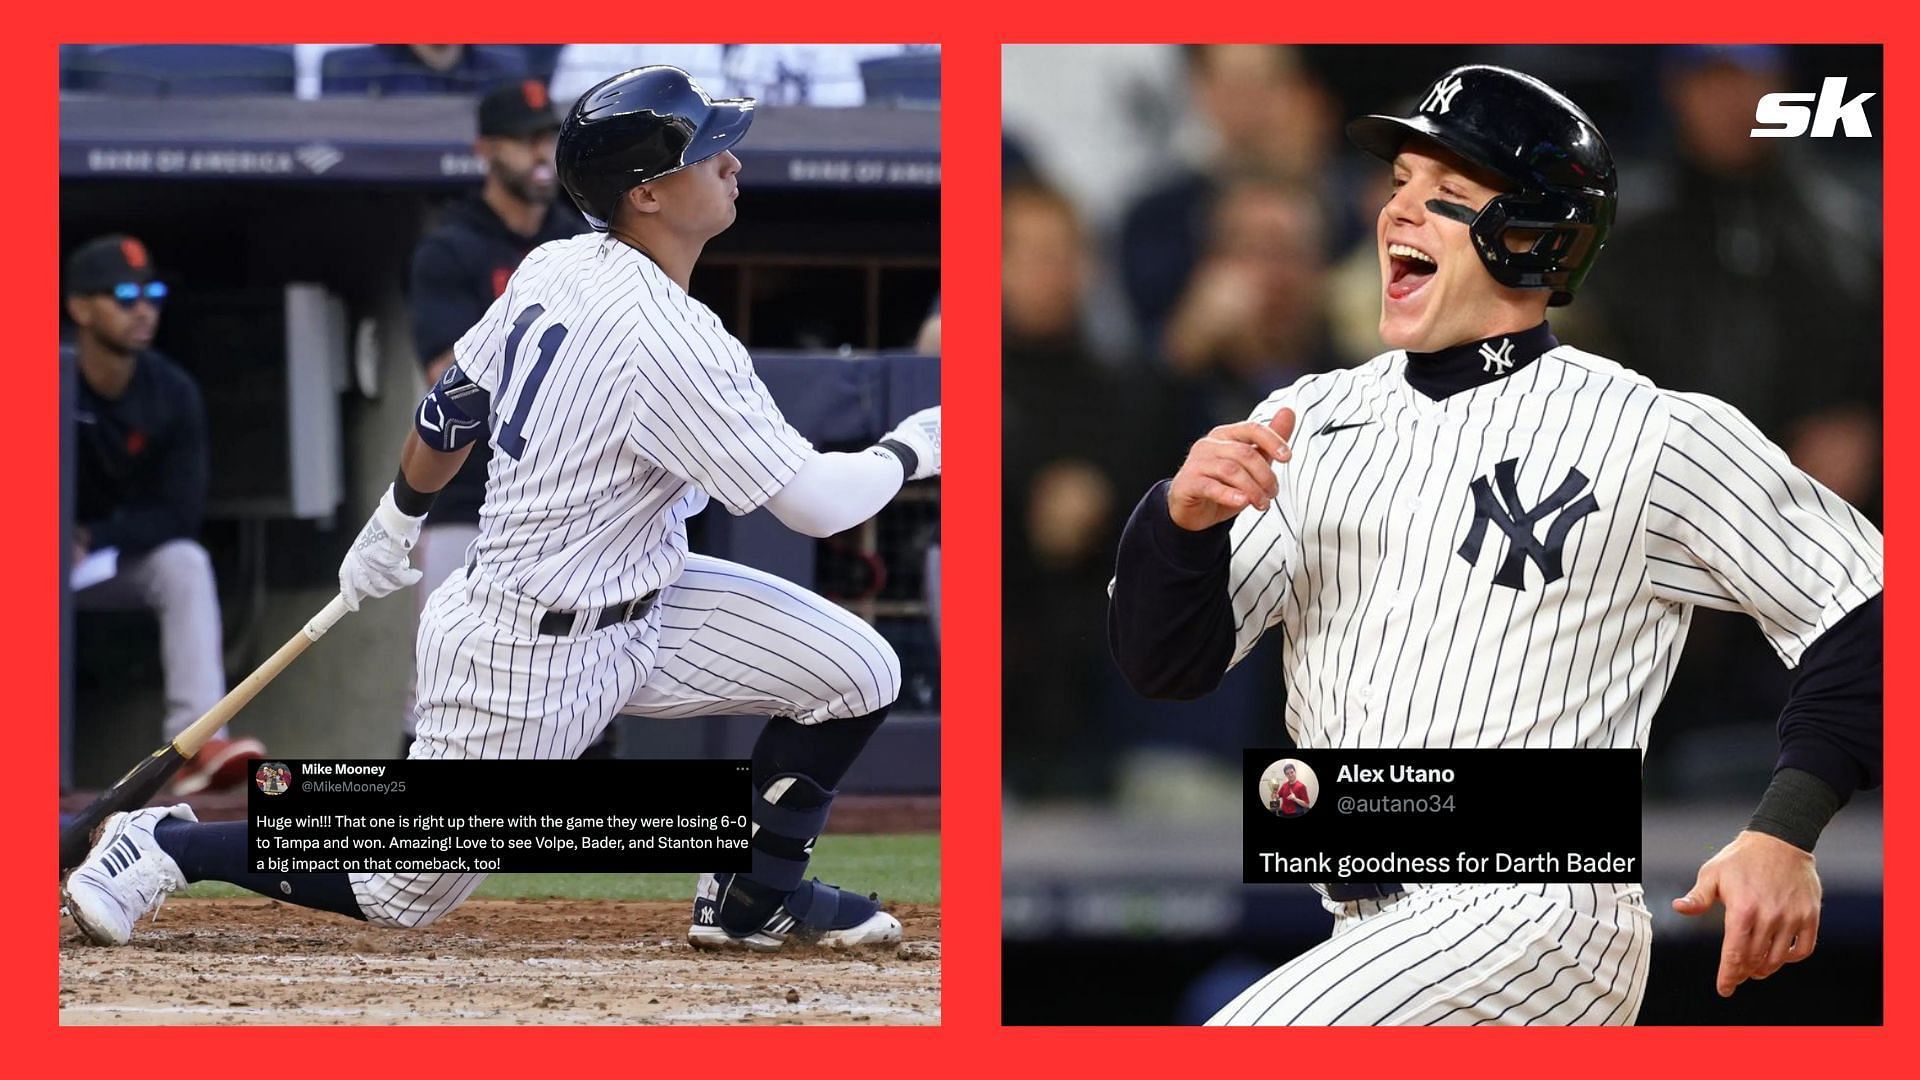 Fans were thrilled with the New York Yankees win